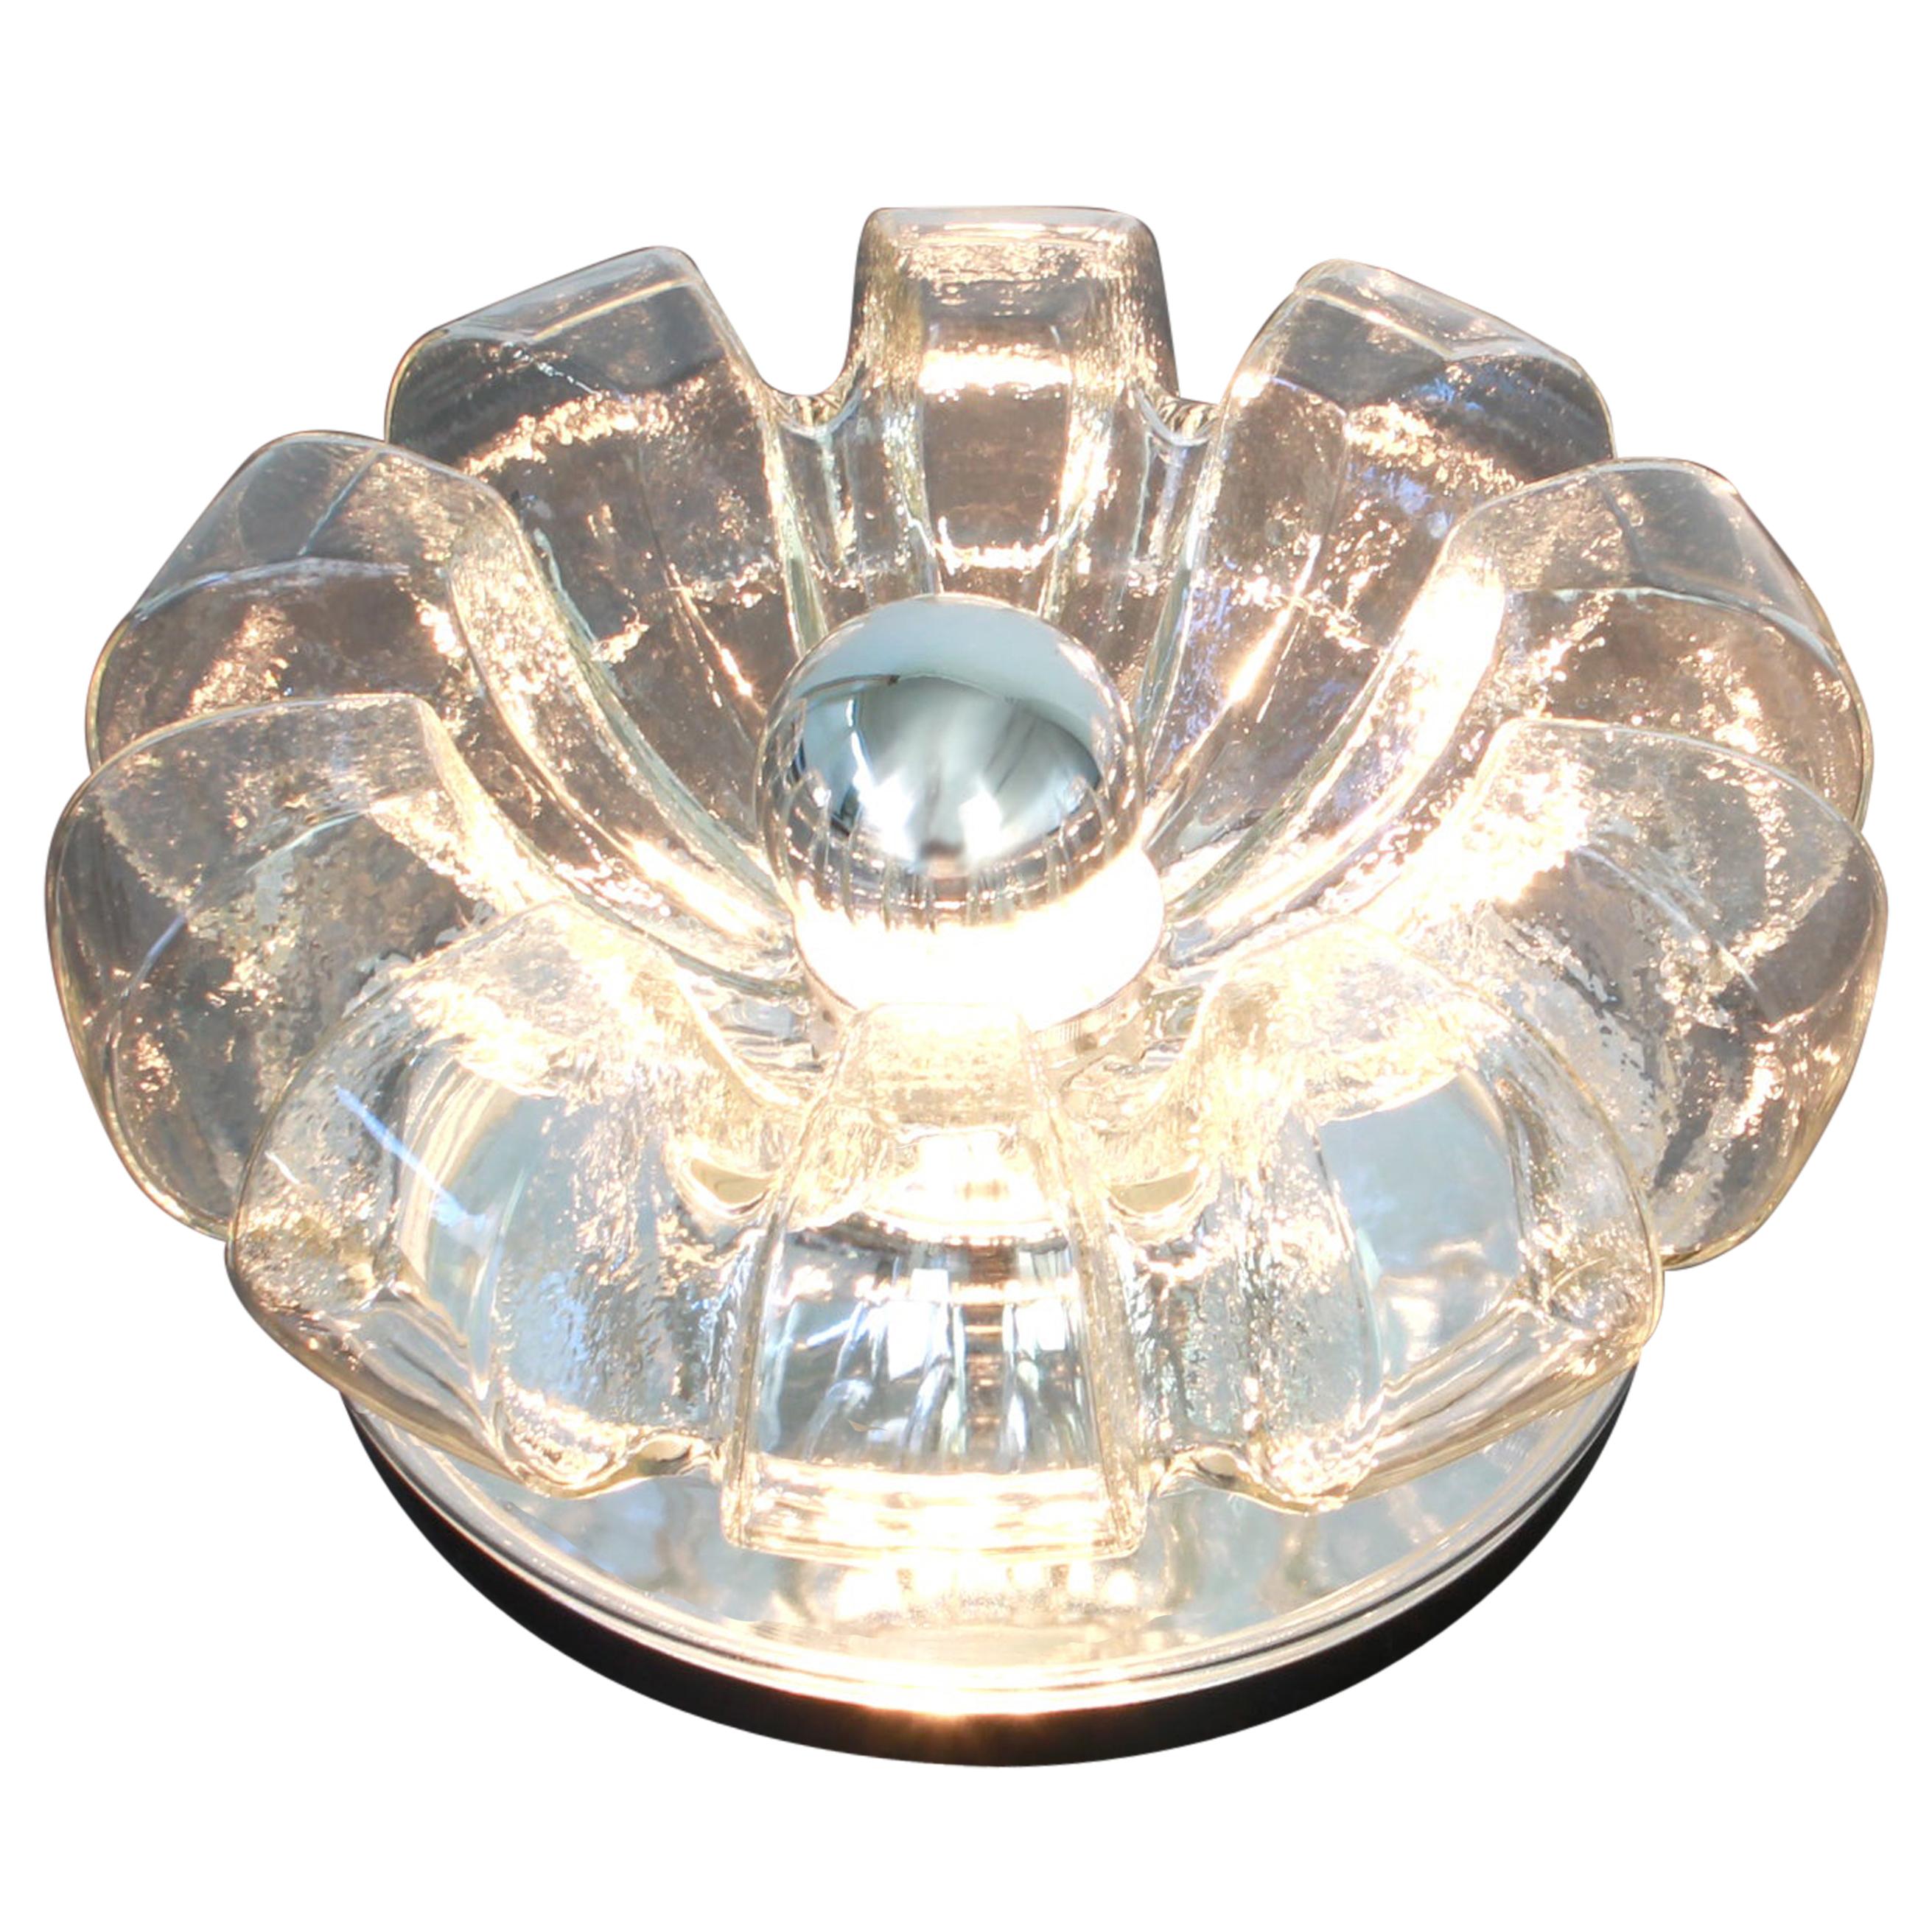 A special round biomorphic clear glass wall sconce or flush mount designed by Koch & Lowy for Peill & Putzler, manufactured in Germany, circa 1970s.

High quality and in very good condition. Cleaned, well-wired and ready to use.

Each fixture